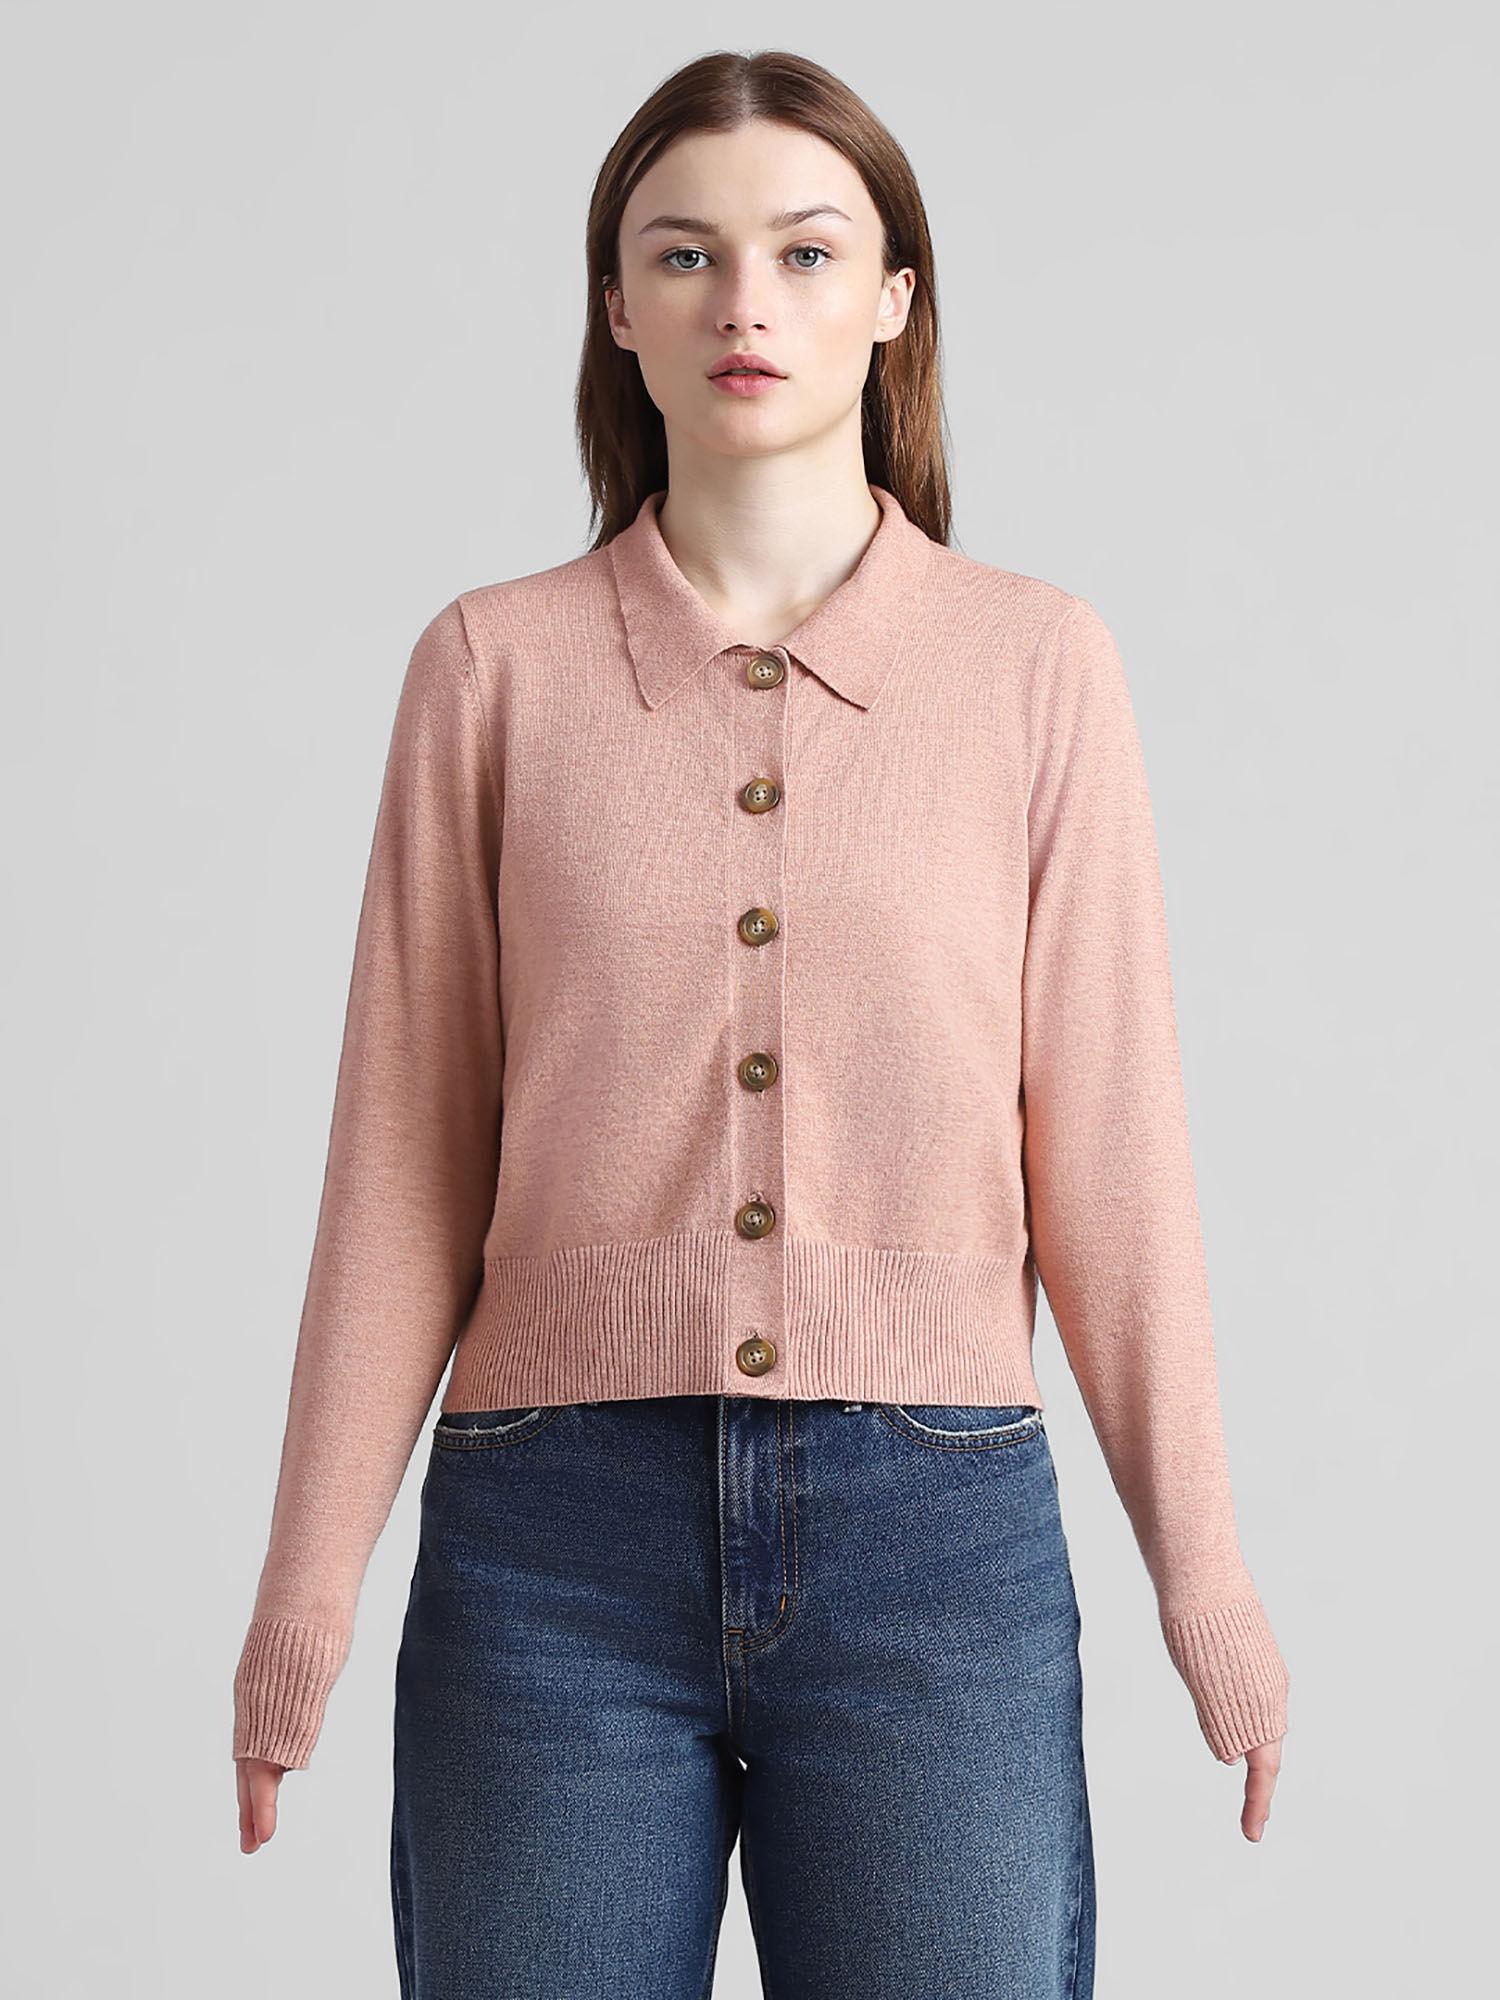 brown-front-button-cardigan